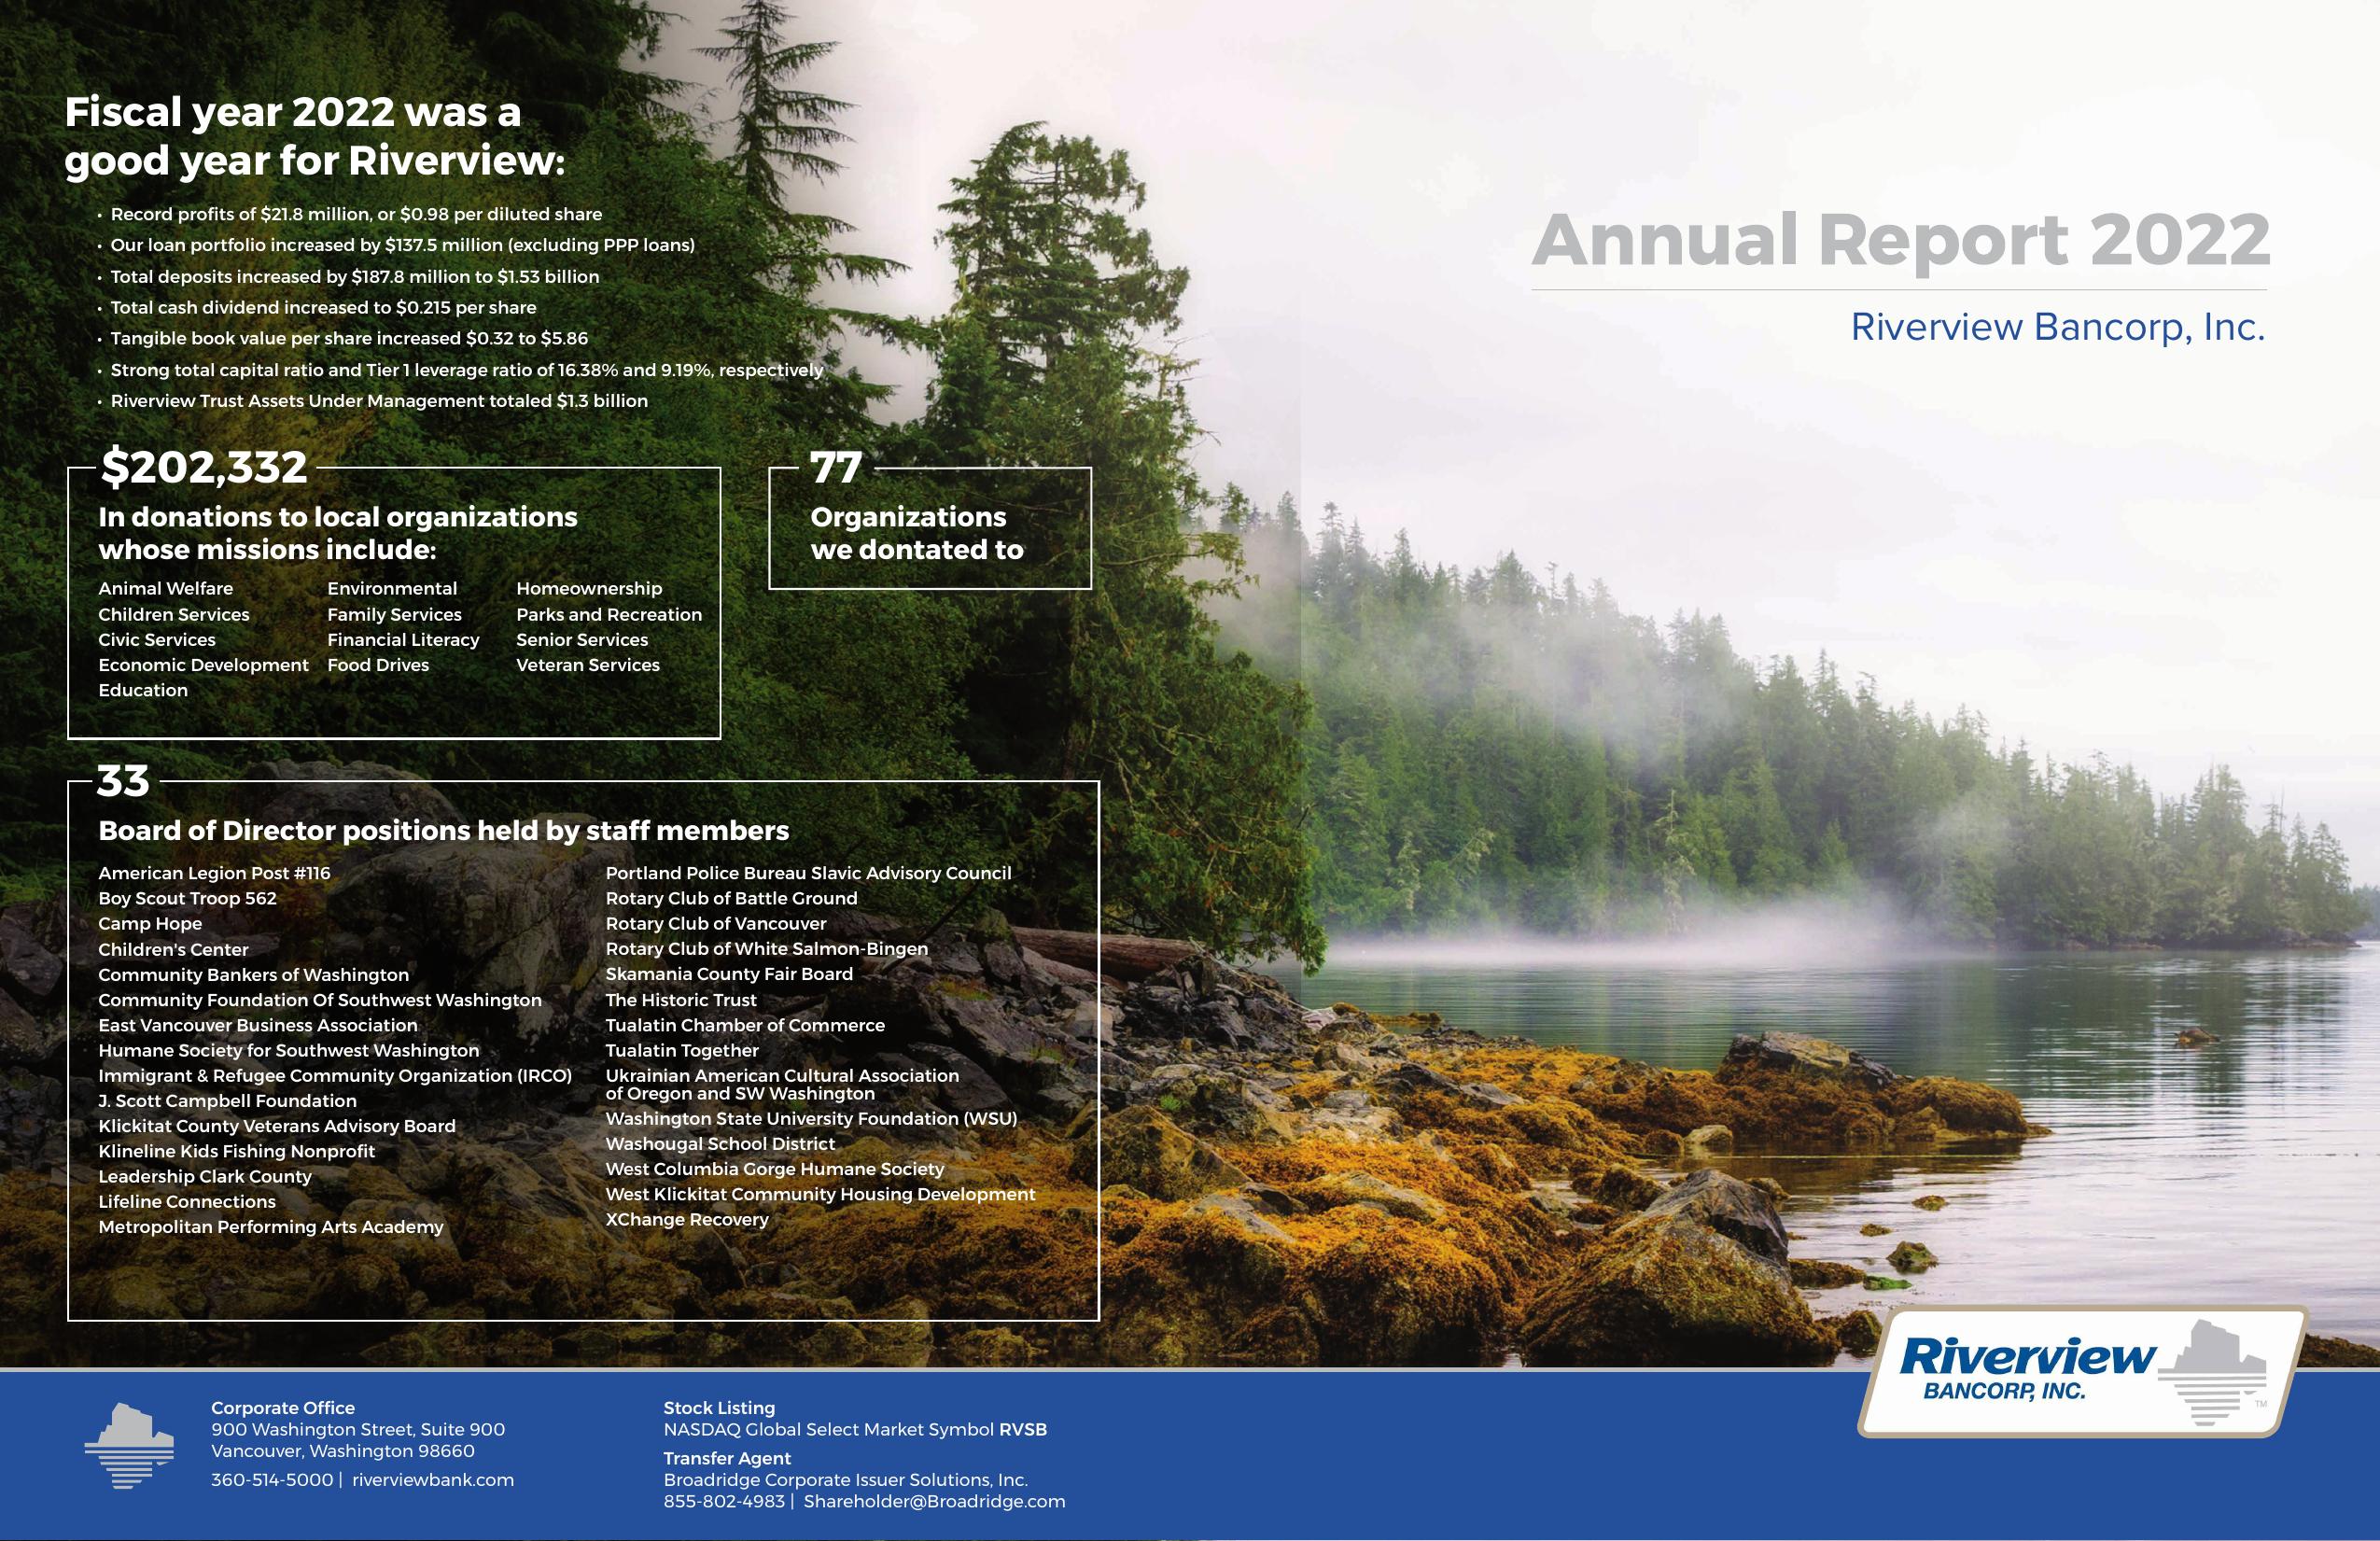 TRADITIONALBANK 2022 Annual Report